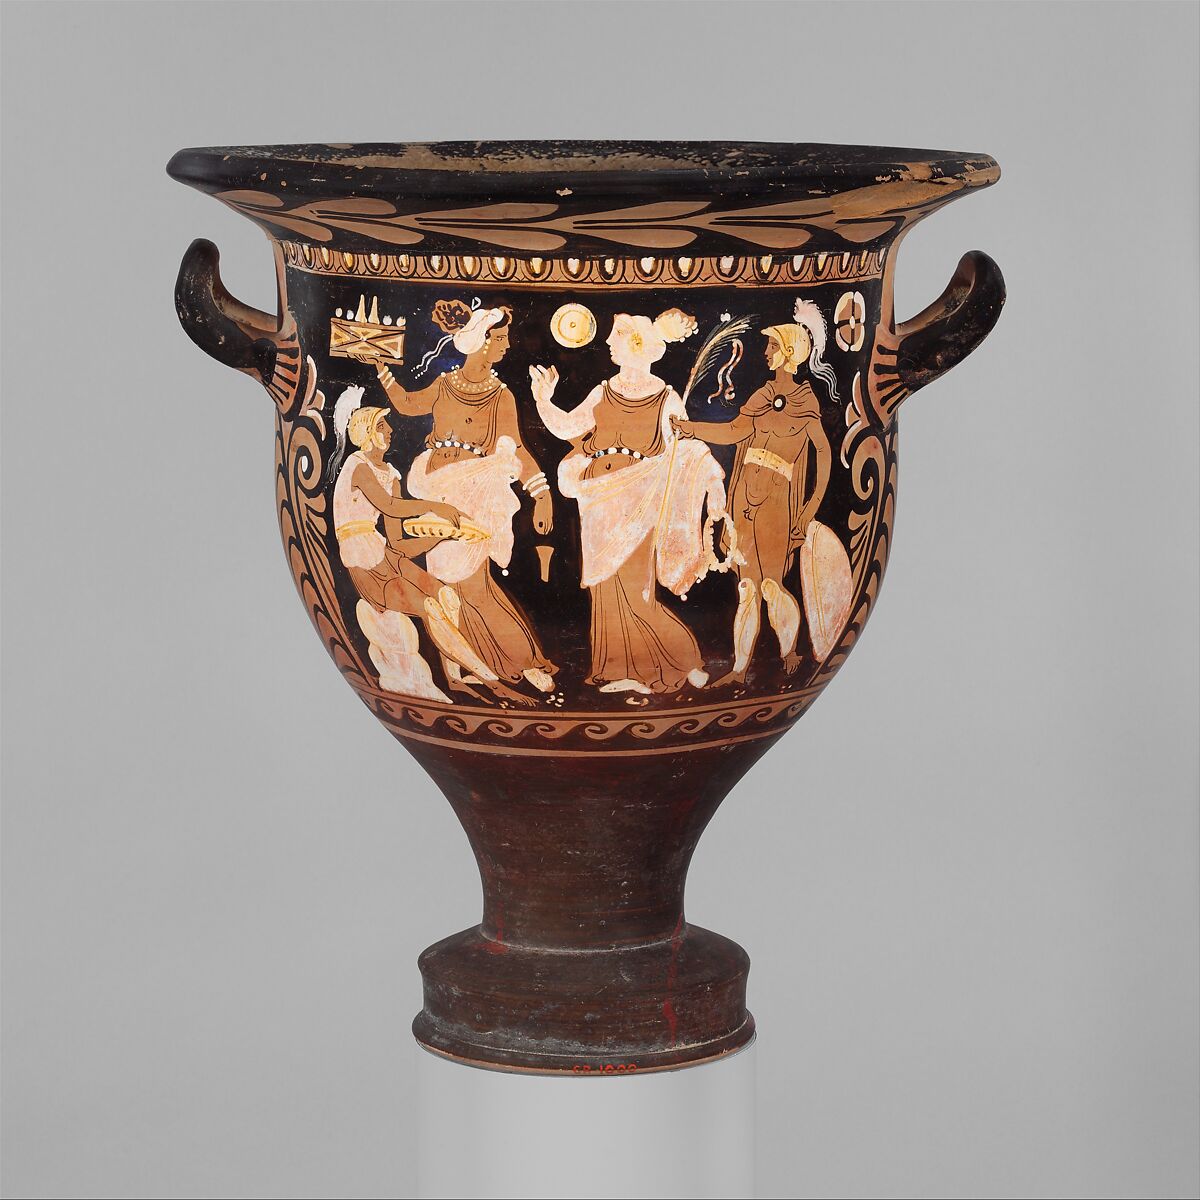 Terracotta bell-krater (mixing bowl), Attributed to the Painter of New York GR 1000, Terracotta, Greek, South Italian, Campanian 